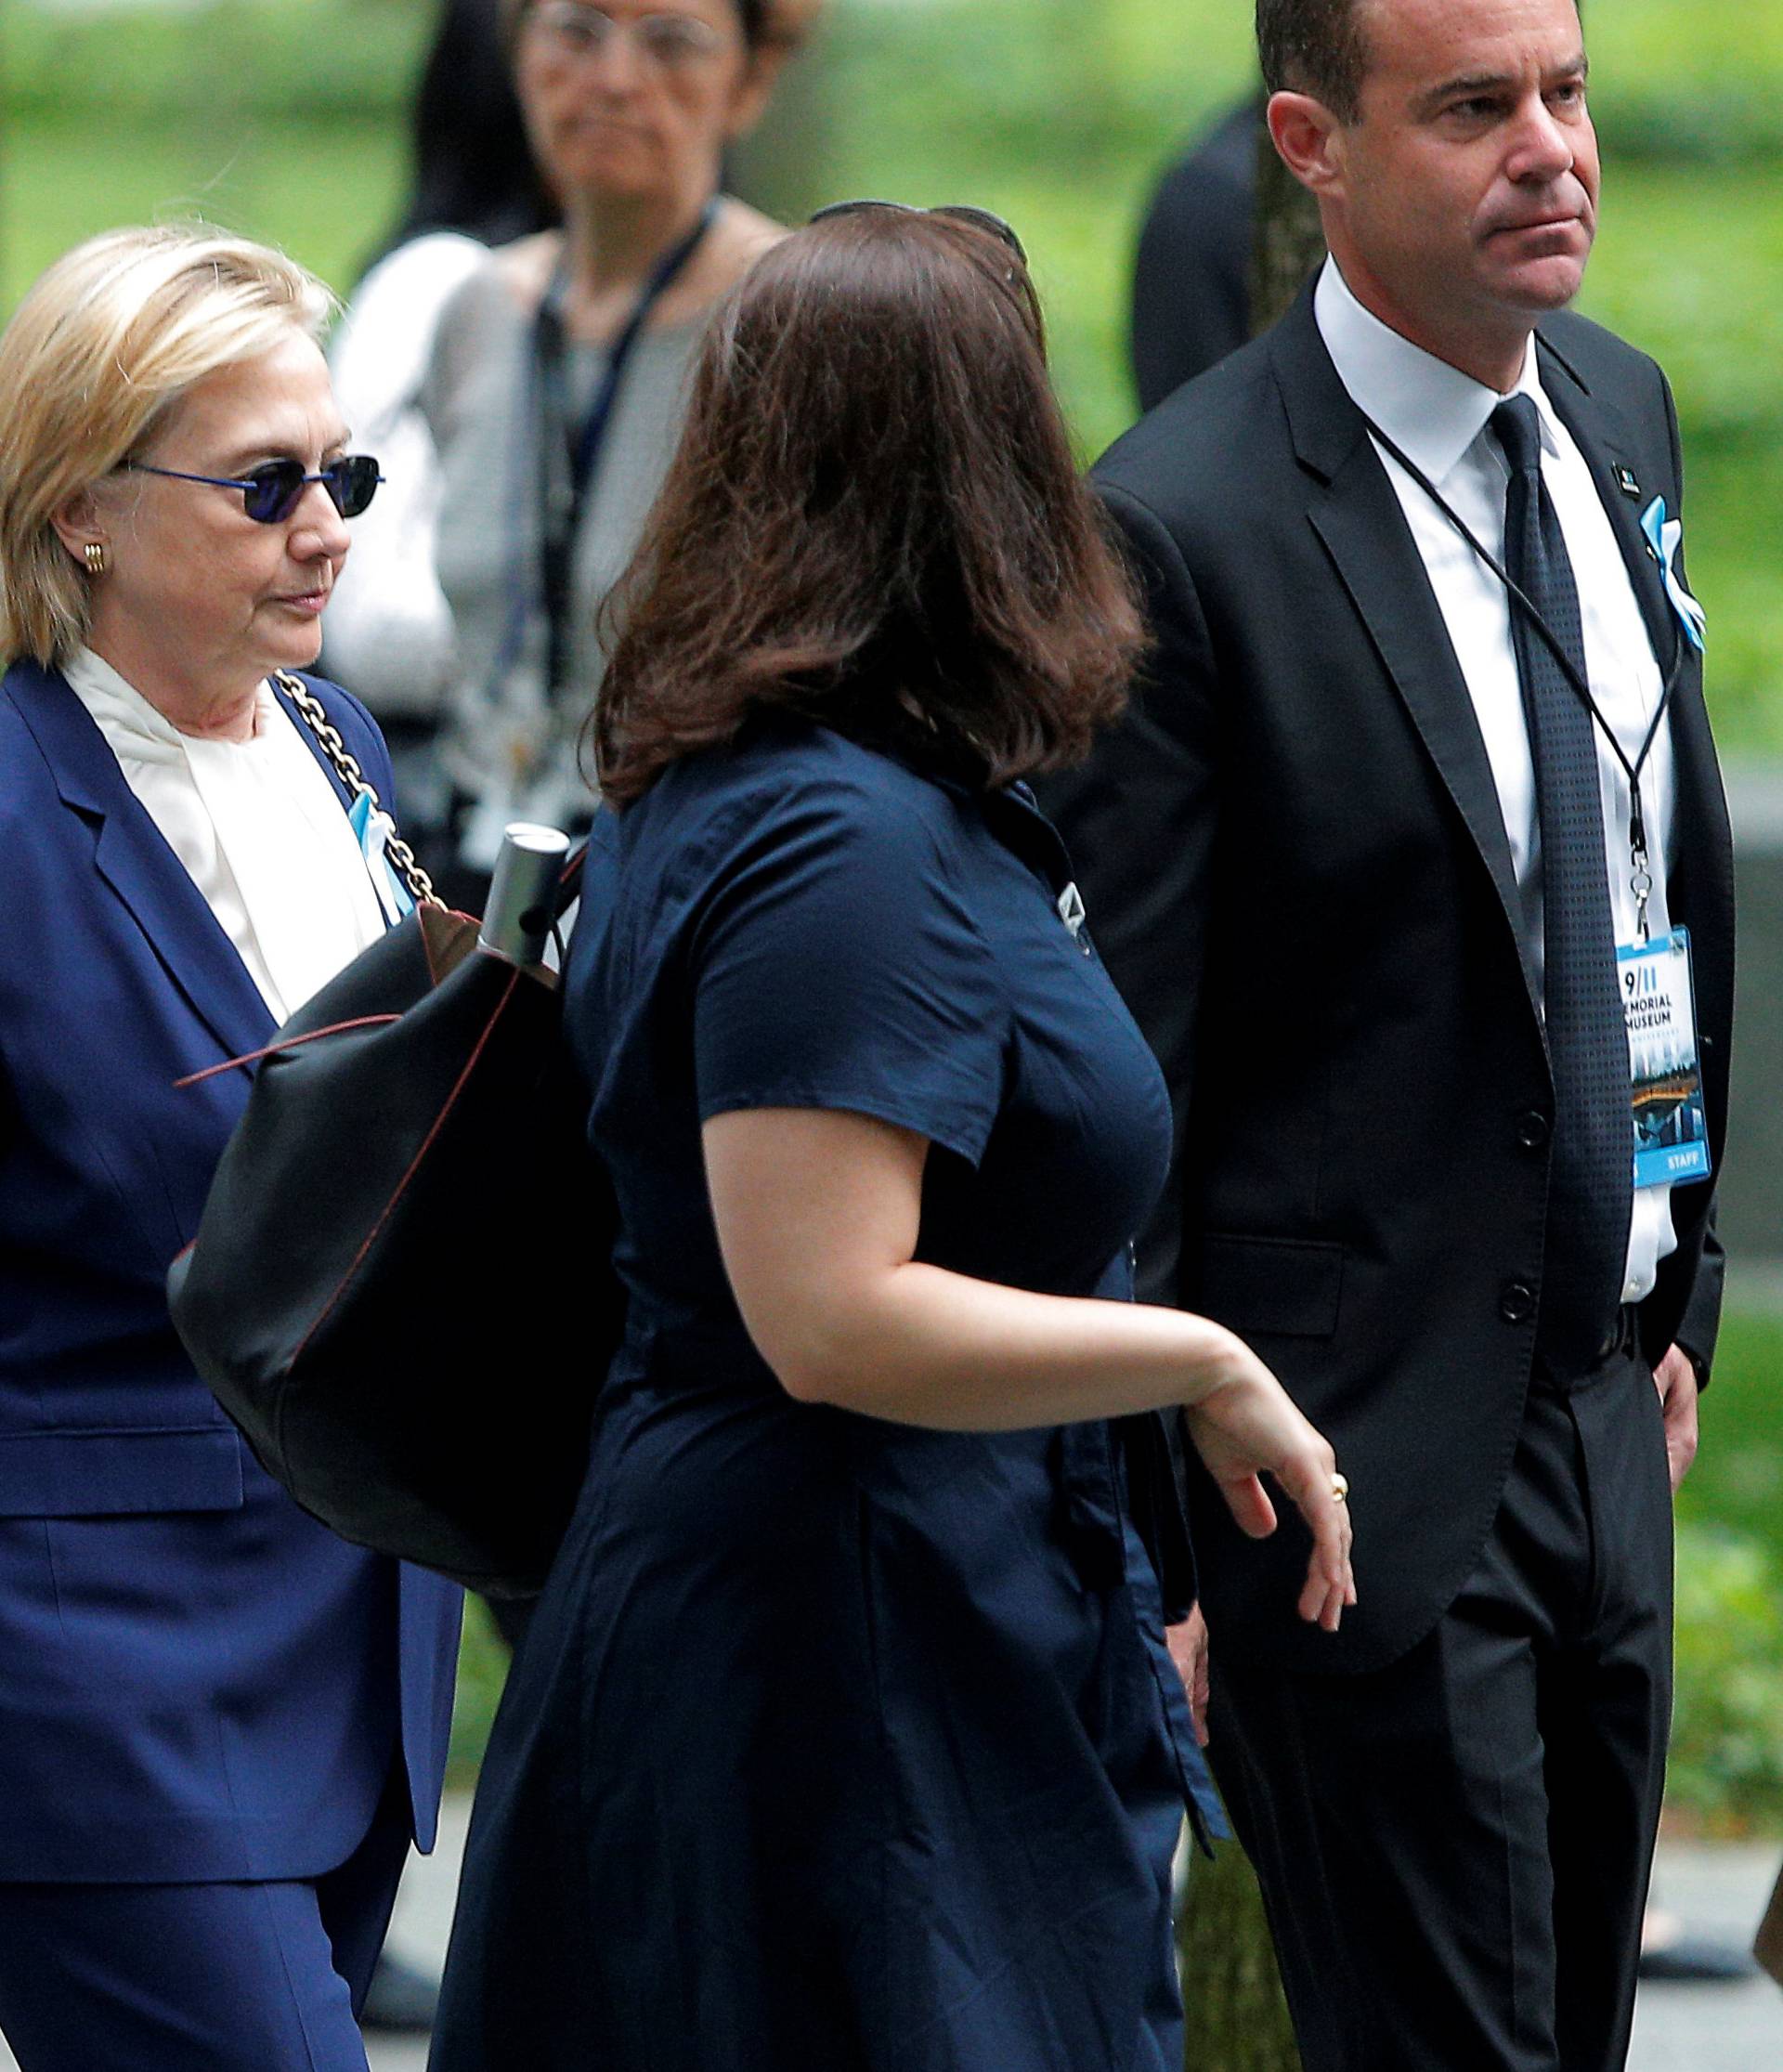 U.S. Democratic presidential candidate Hillary Clinton arrives for ceremonies to mark the 15th anniversary of the September 11 attacks at the National 9/11 Memorial in New York